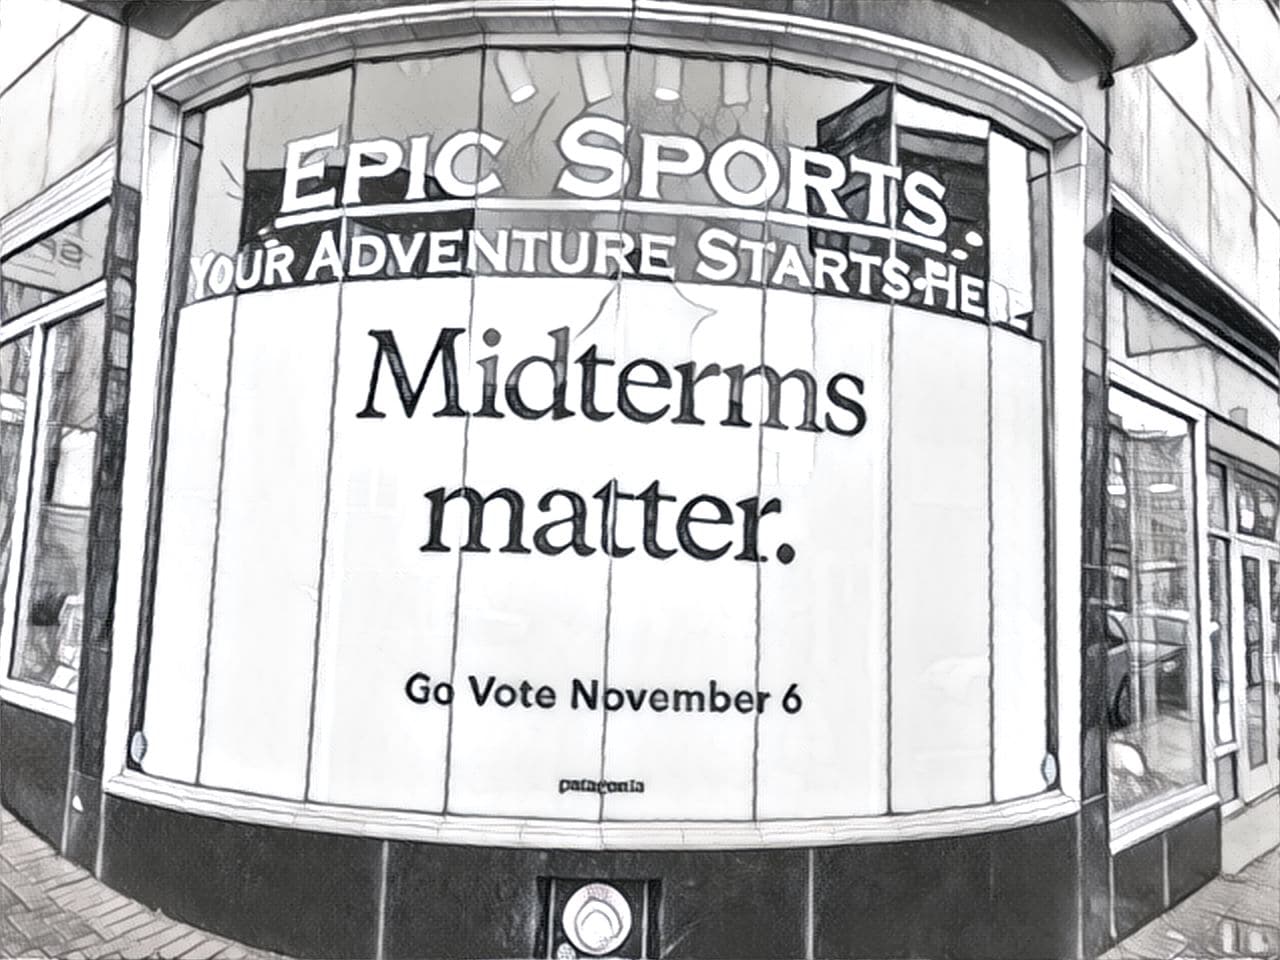 Midterms Matter Image by Paul Roberts